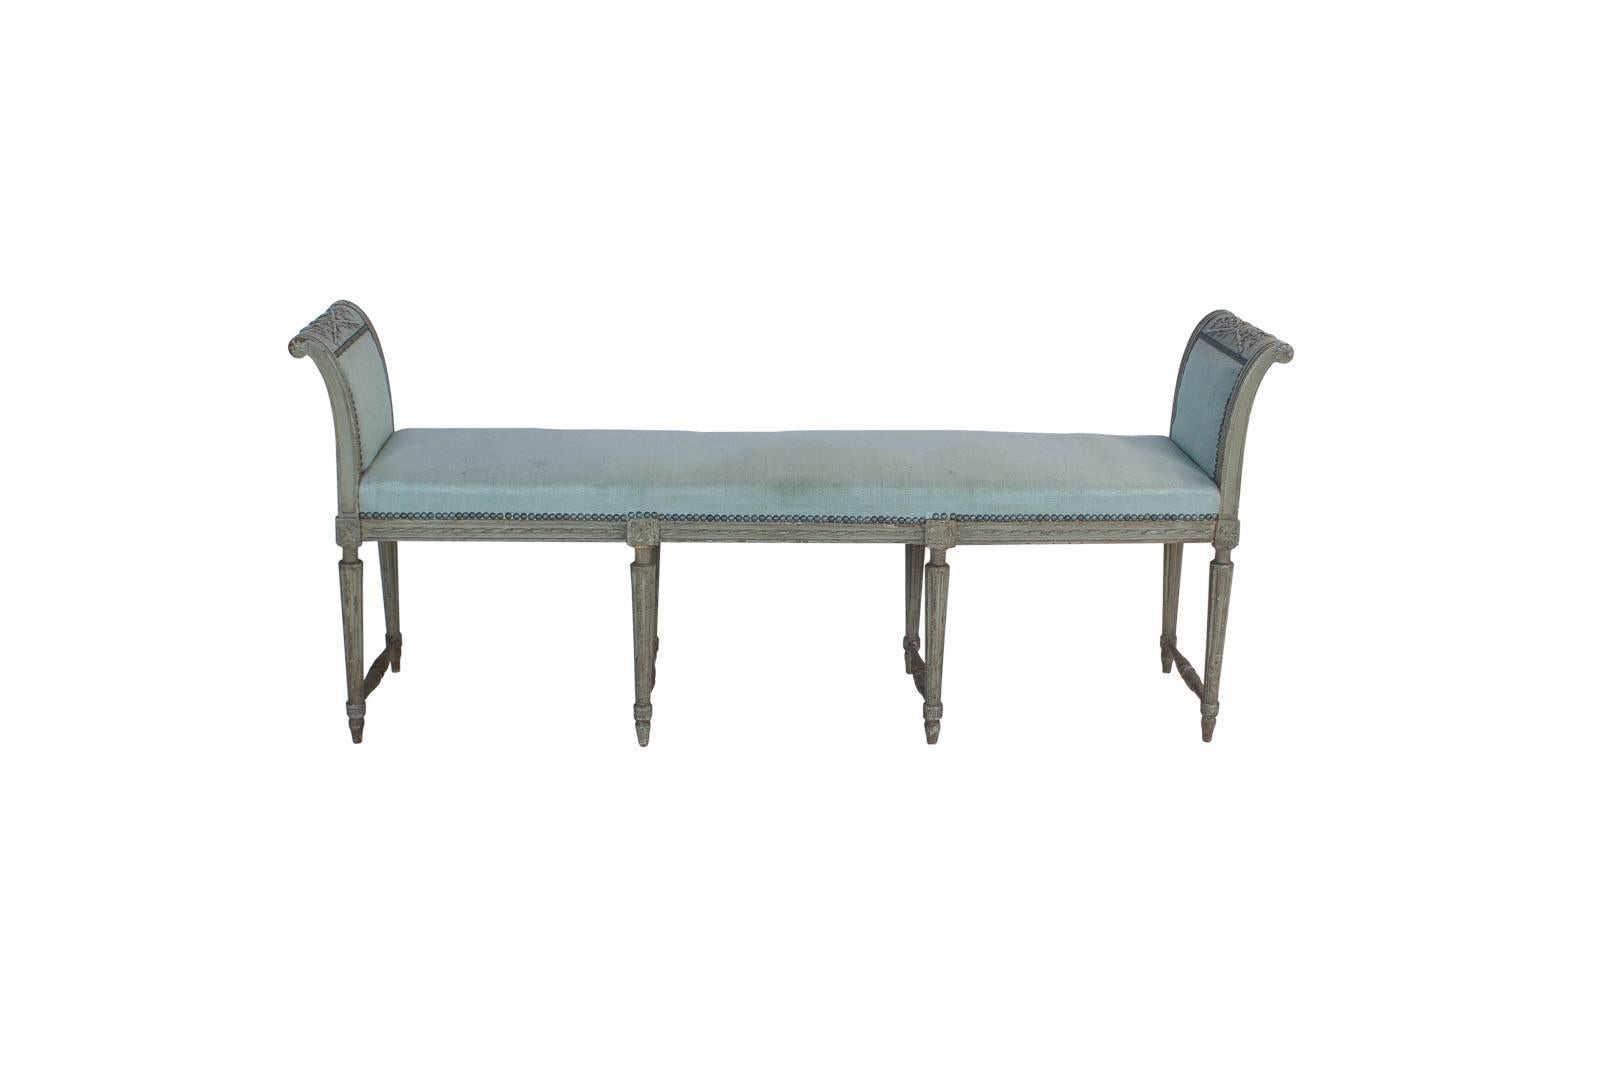 Late 19th Century Painted French Bench or Window Seat, circa 1870